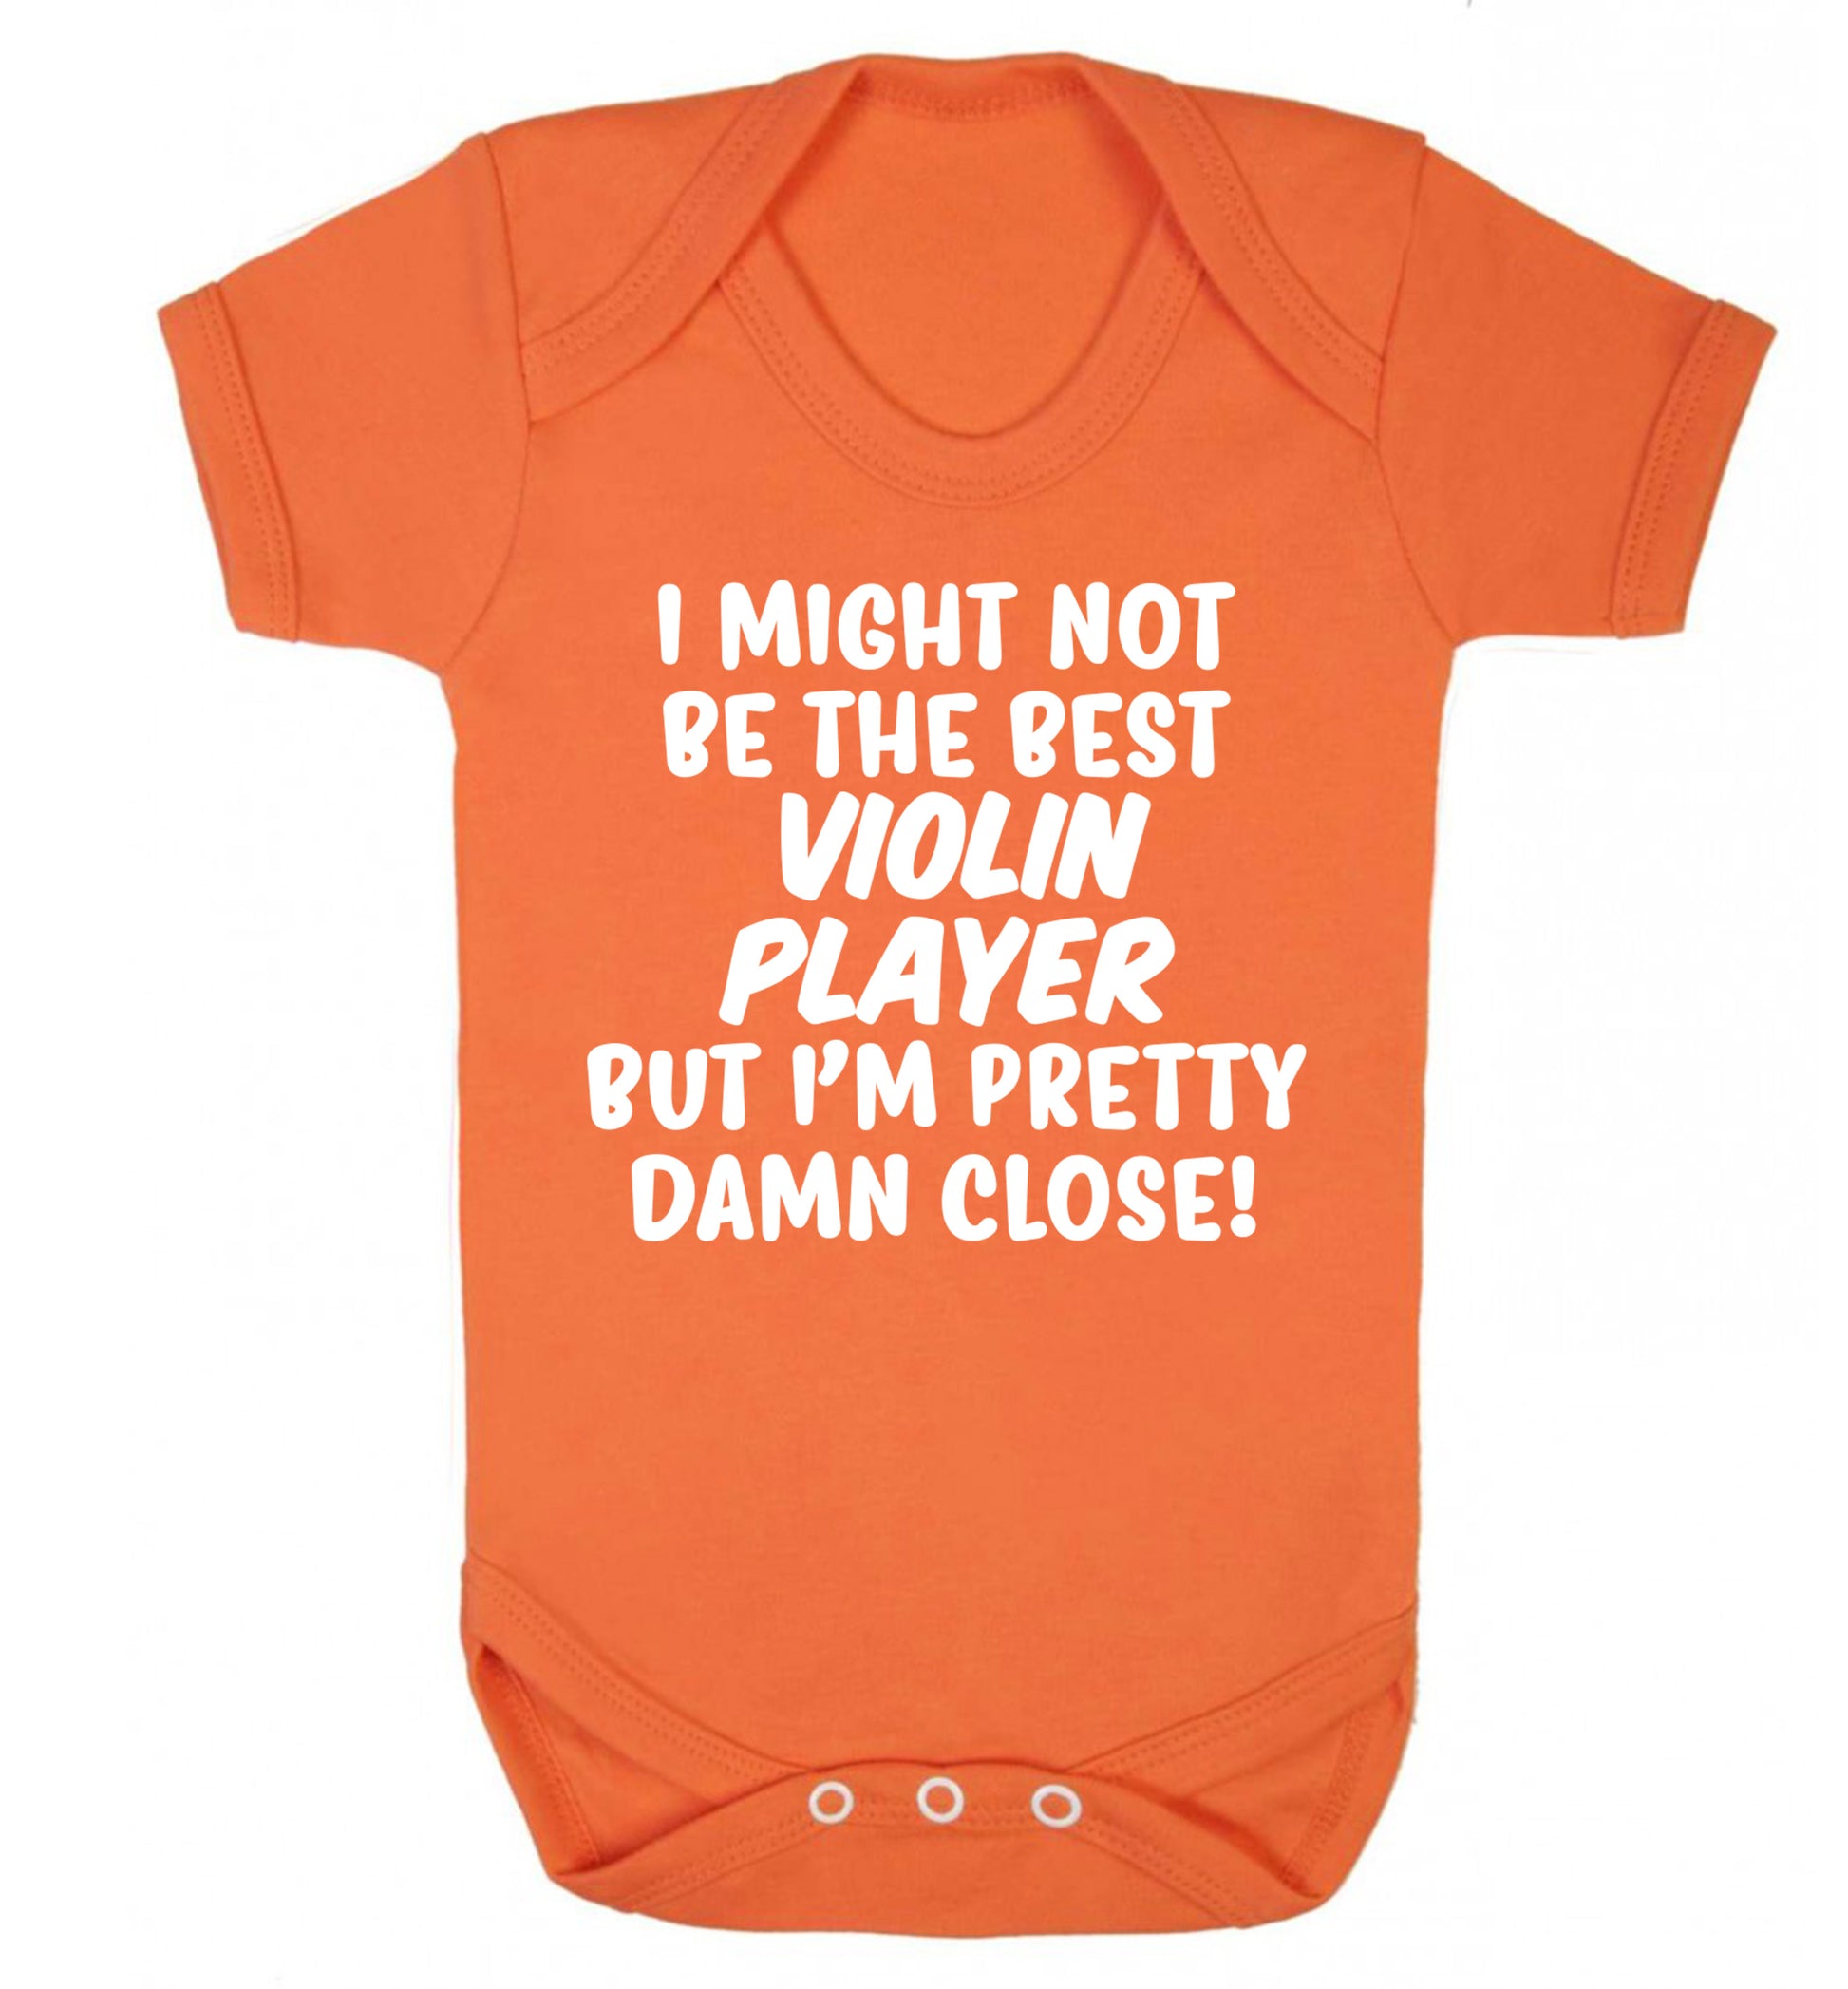 I might not be the best violin player but I'm pretty close Baby Vest orange 18-24 months